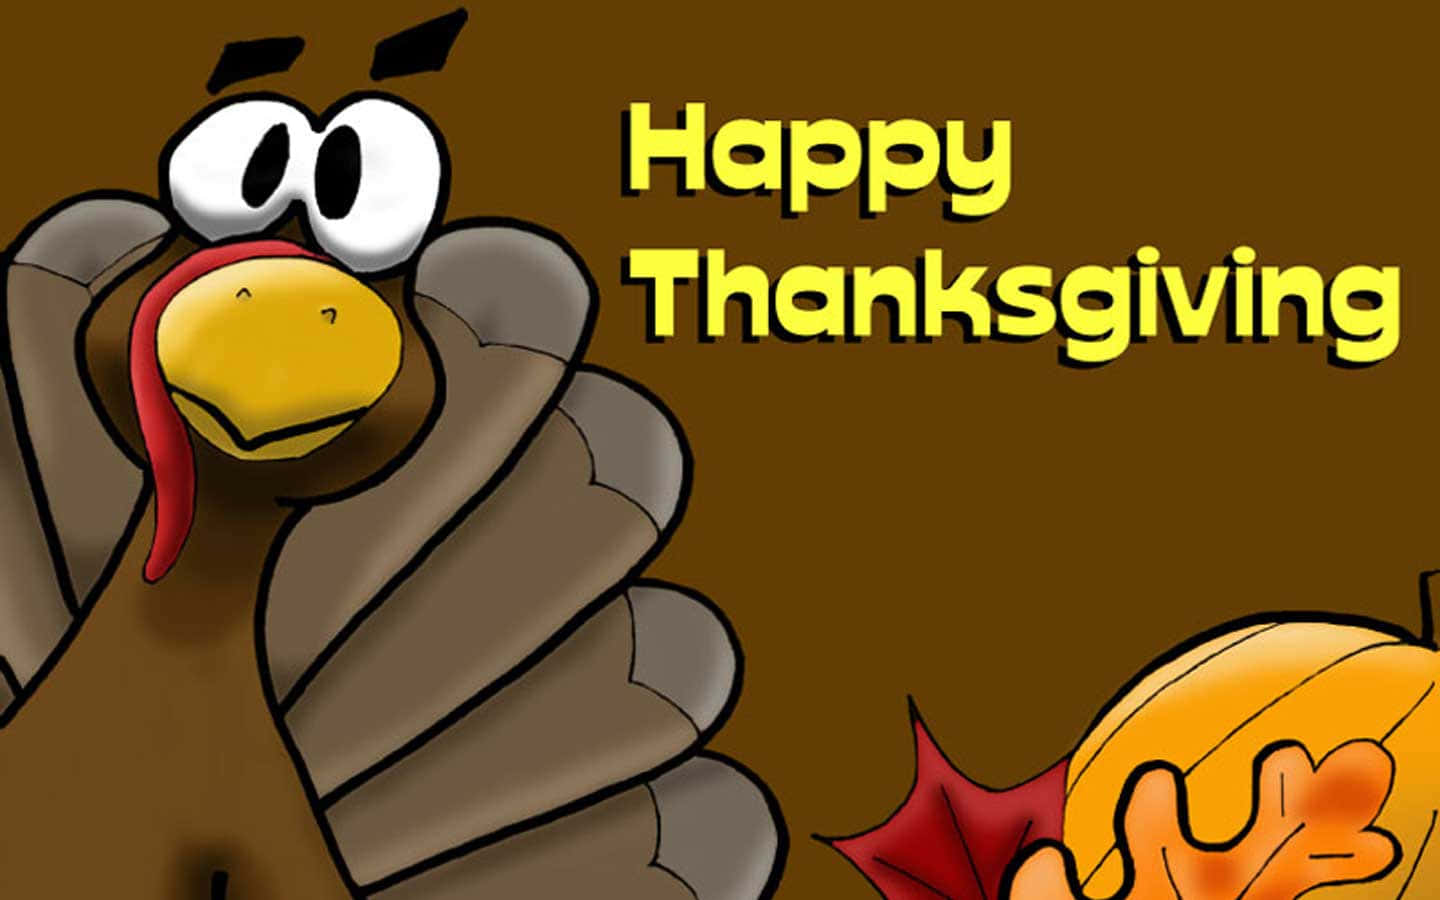 Sending warm wishes for a wonderful Thanksgiving